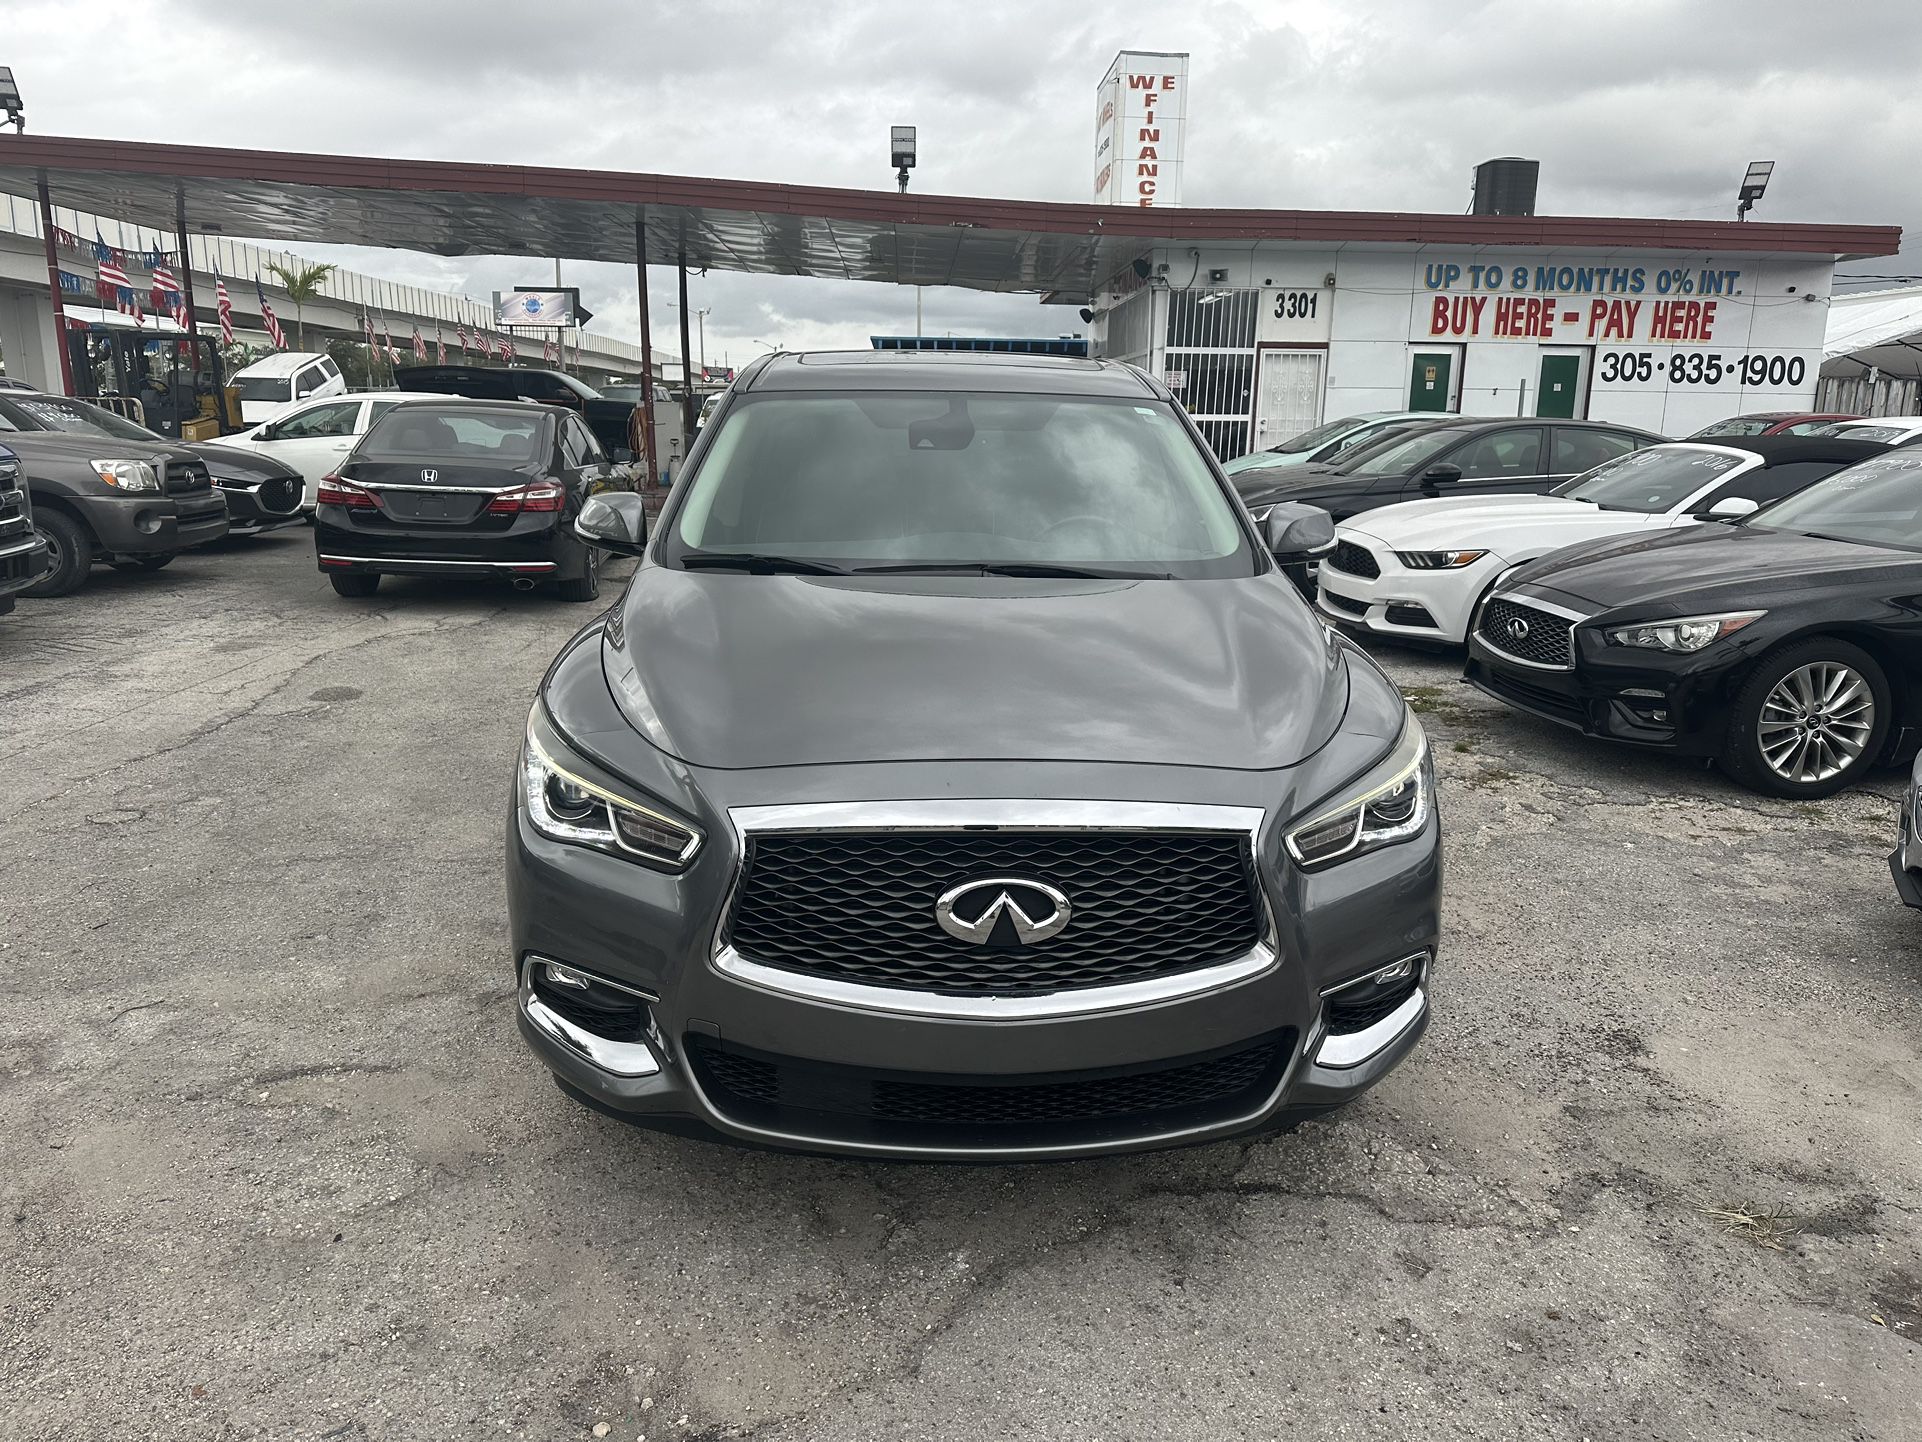 used 2019 infiniti qx60 - front view 2